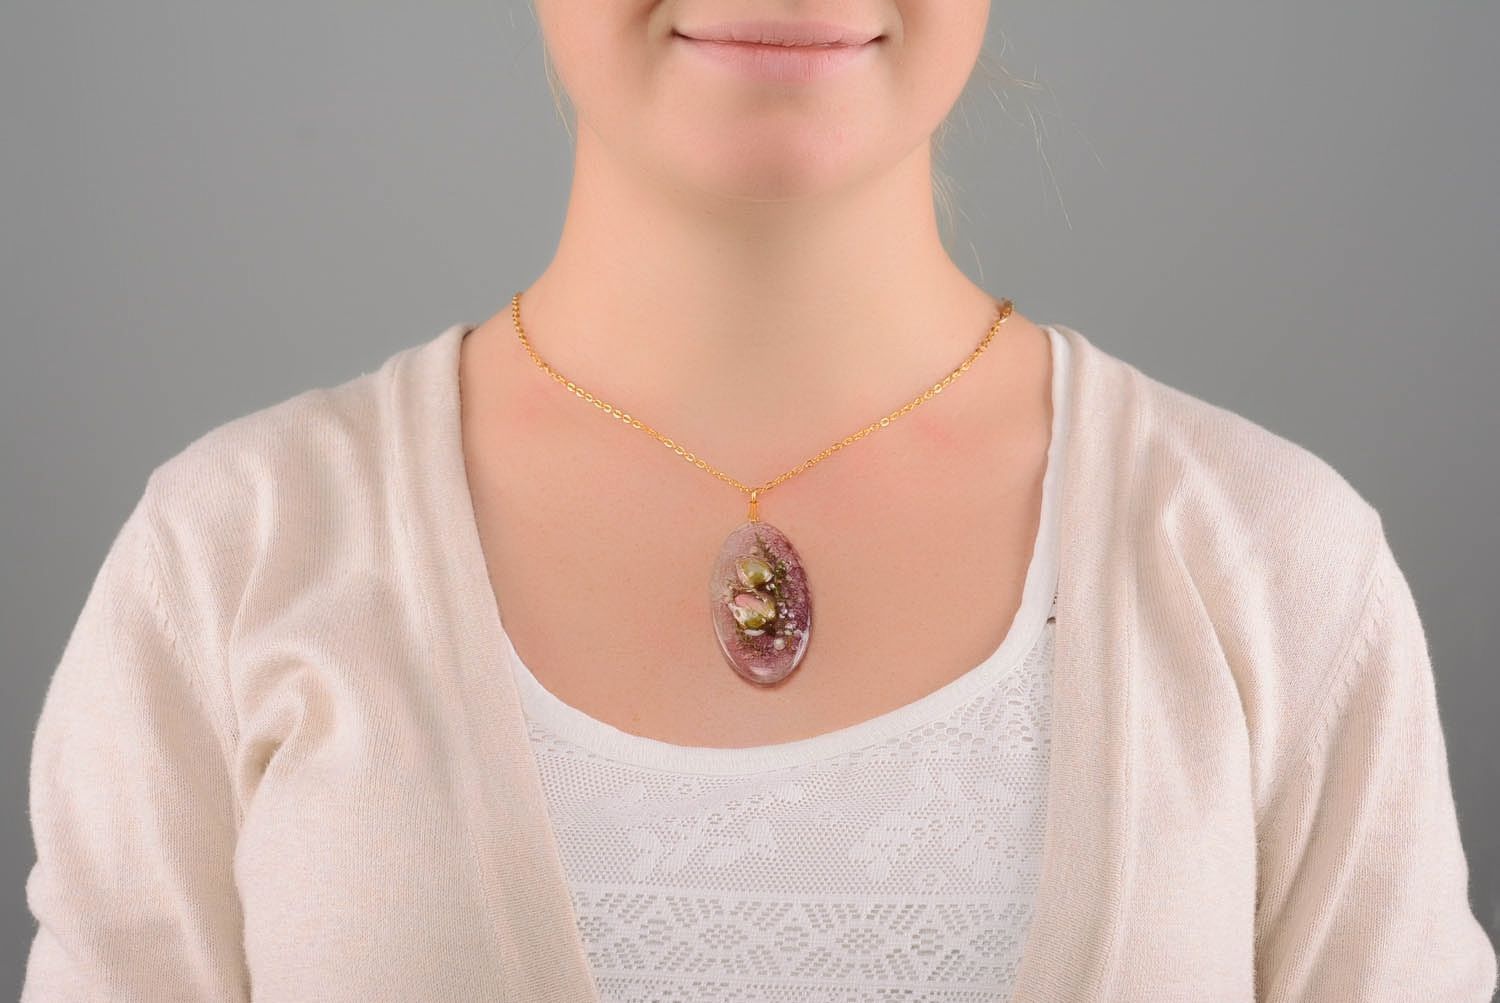 Oval pendant with chain Heather photo 3